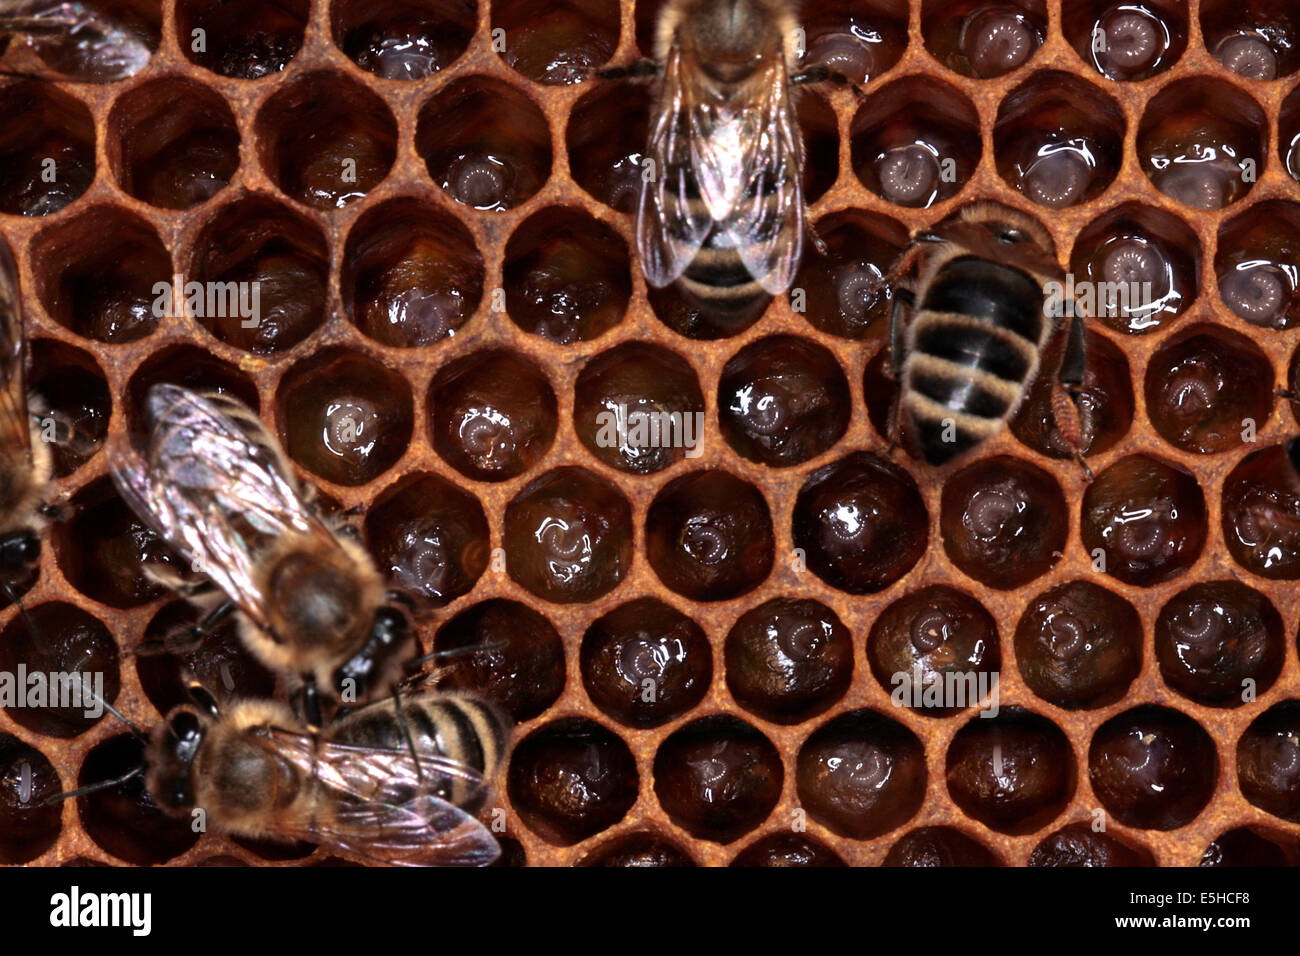 Small and youngest larvaes in the cells of a honey bee brood comb. They ensure the ongoing preservation of the bee colony. Photo: Klaus Nowottnick Date: June 04, 2010 Stock Photo